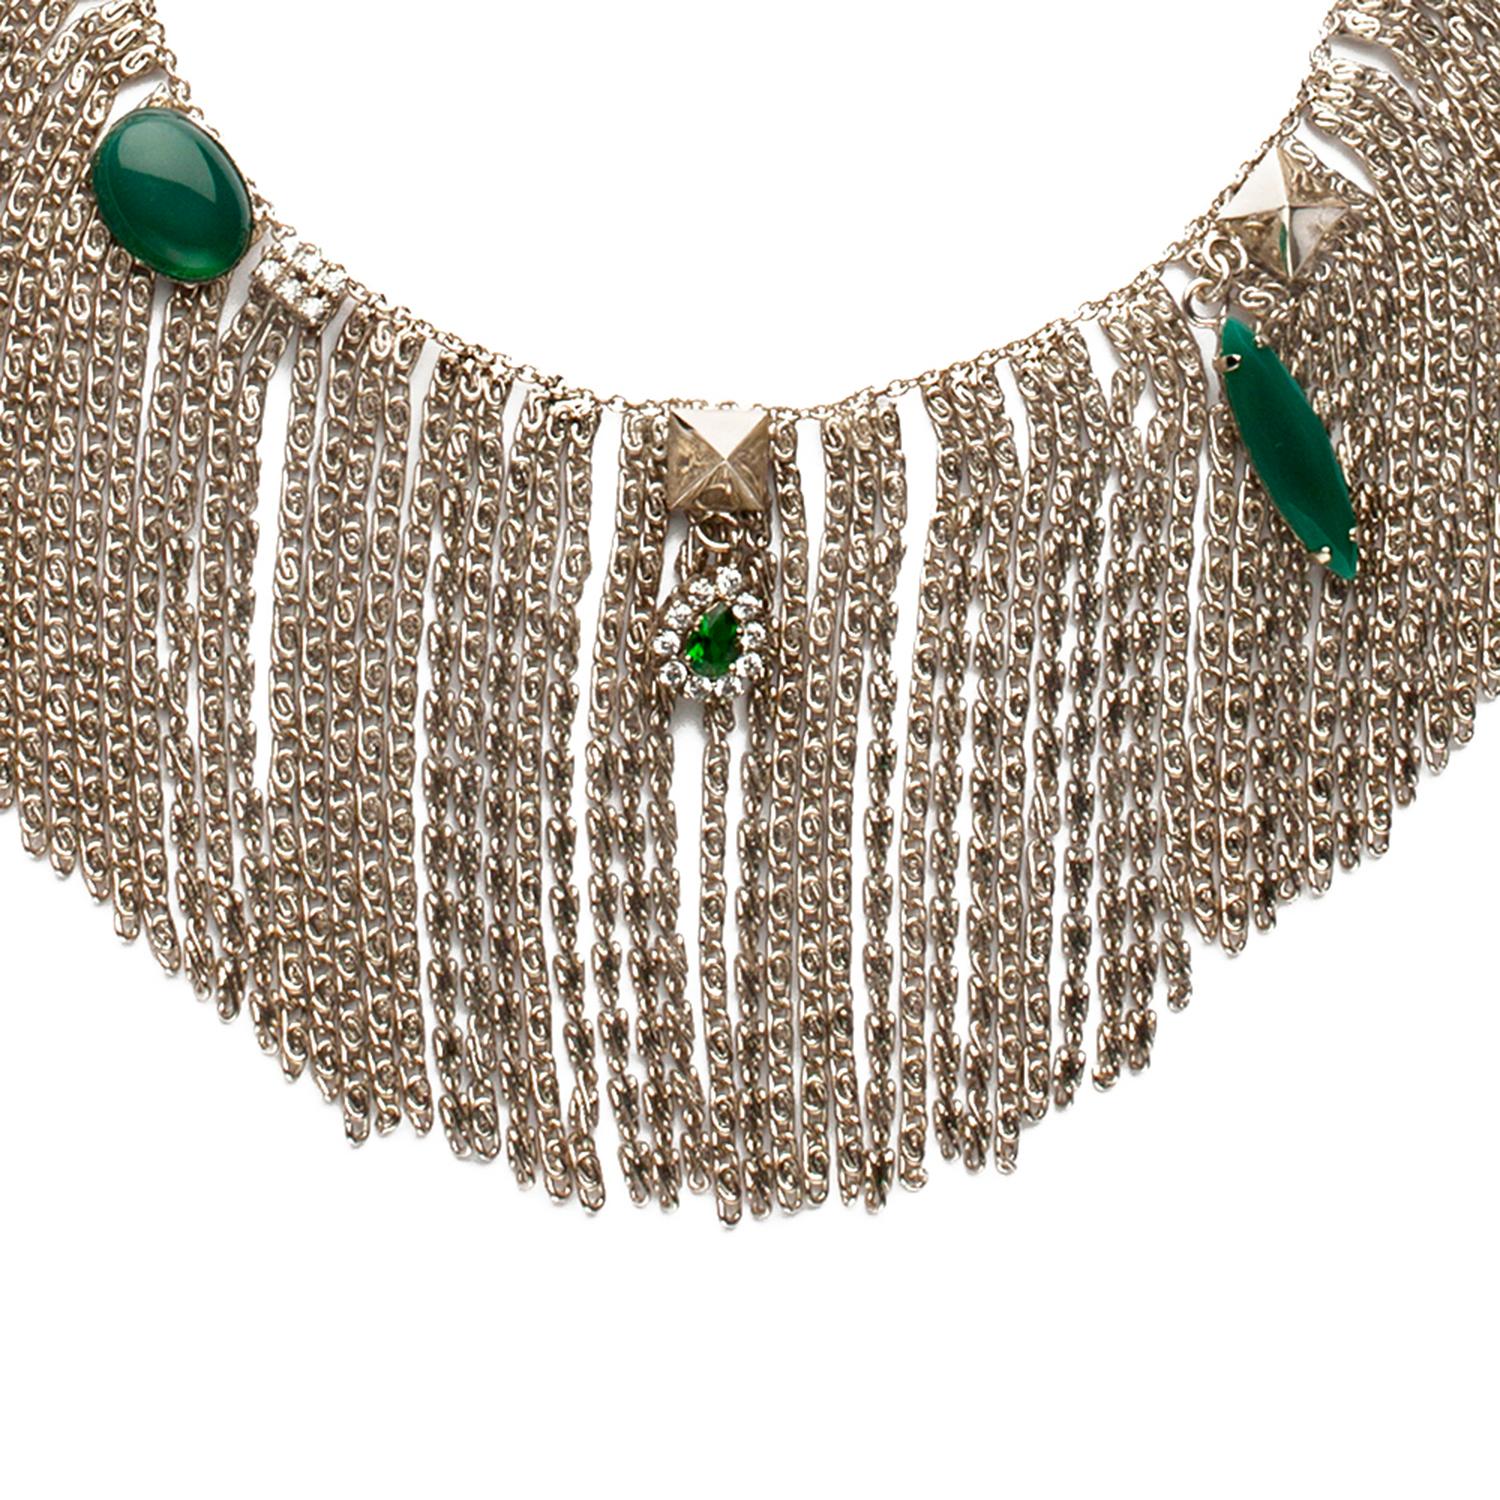 Contemporary Iosselliani Green Agate Fringed Necklace For Sale